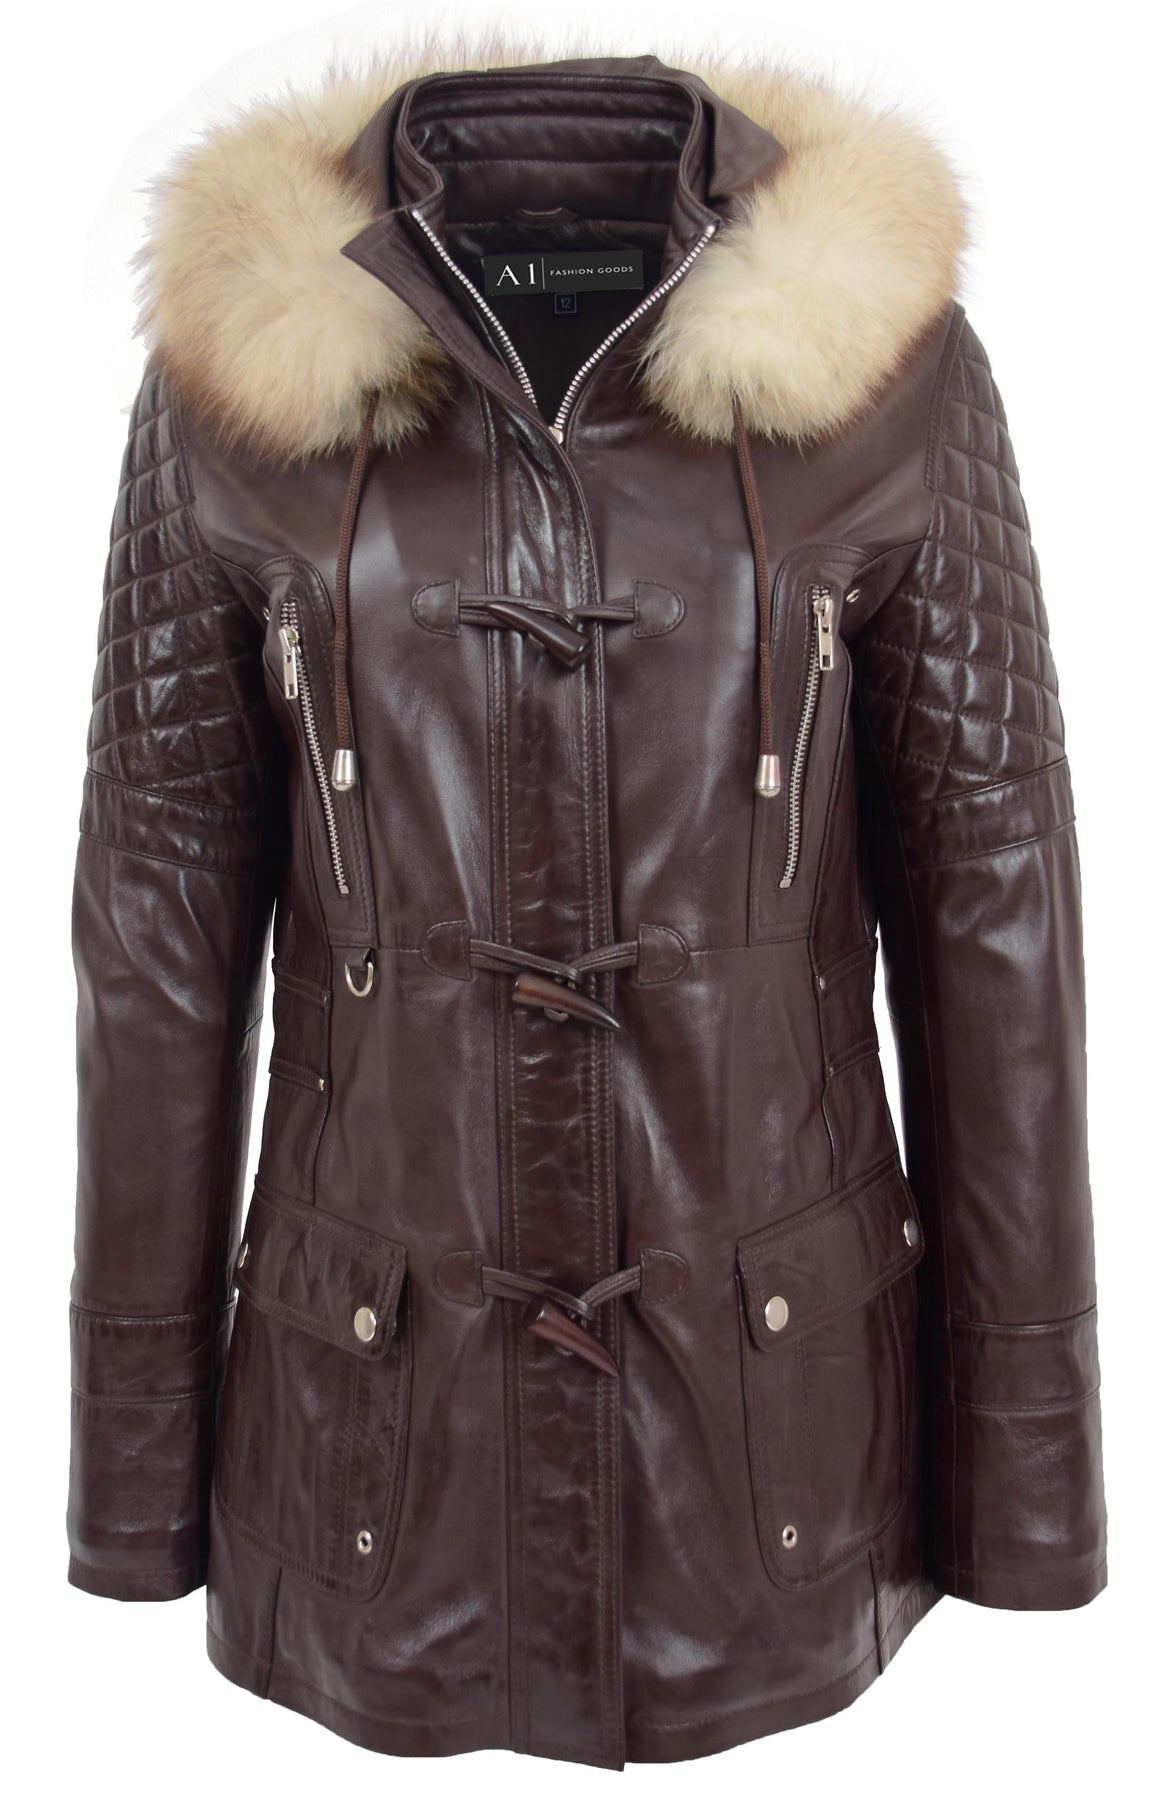 Womens Brown Leather Duffle Coat Removable Hood   A1 Fashion Goods